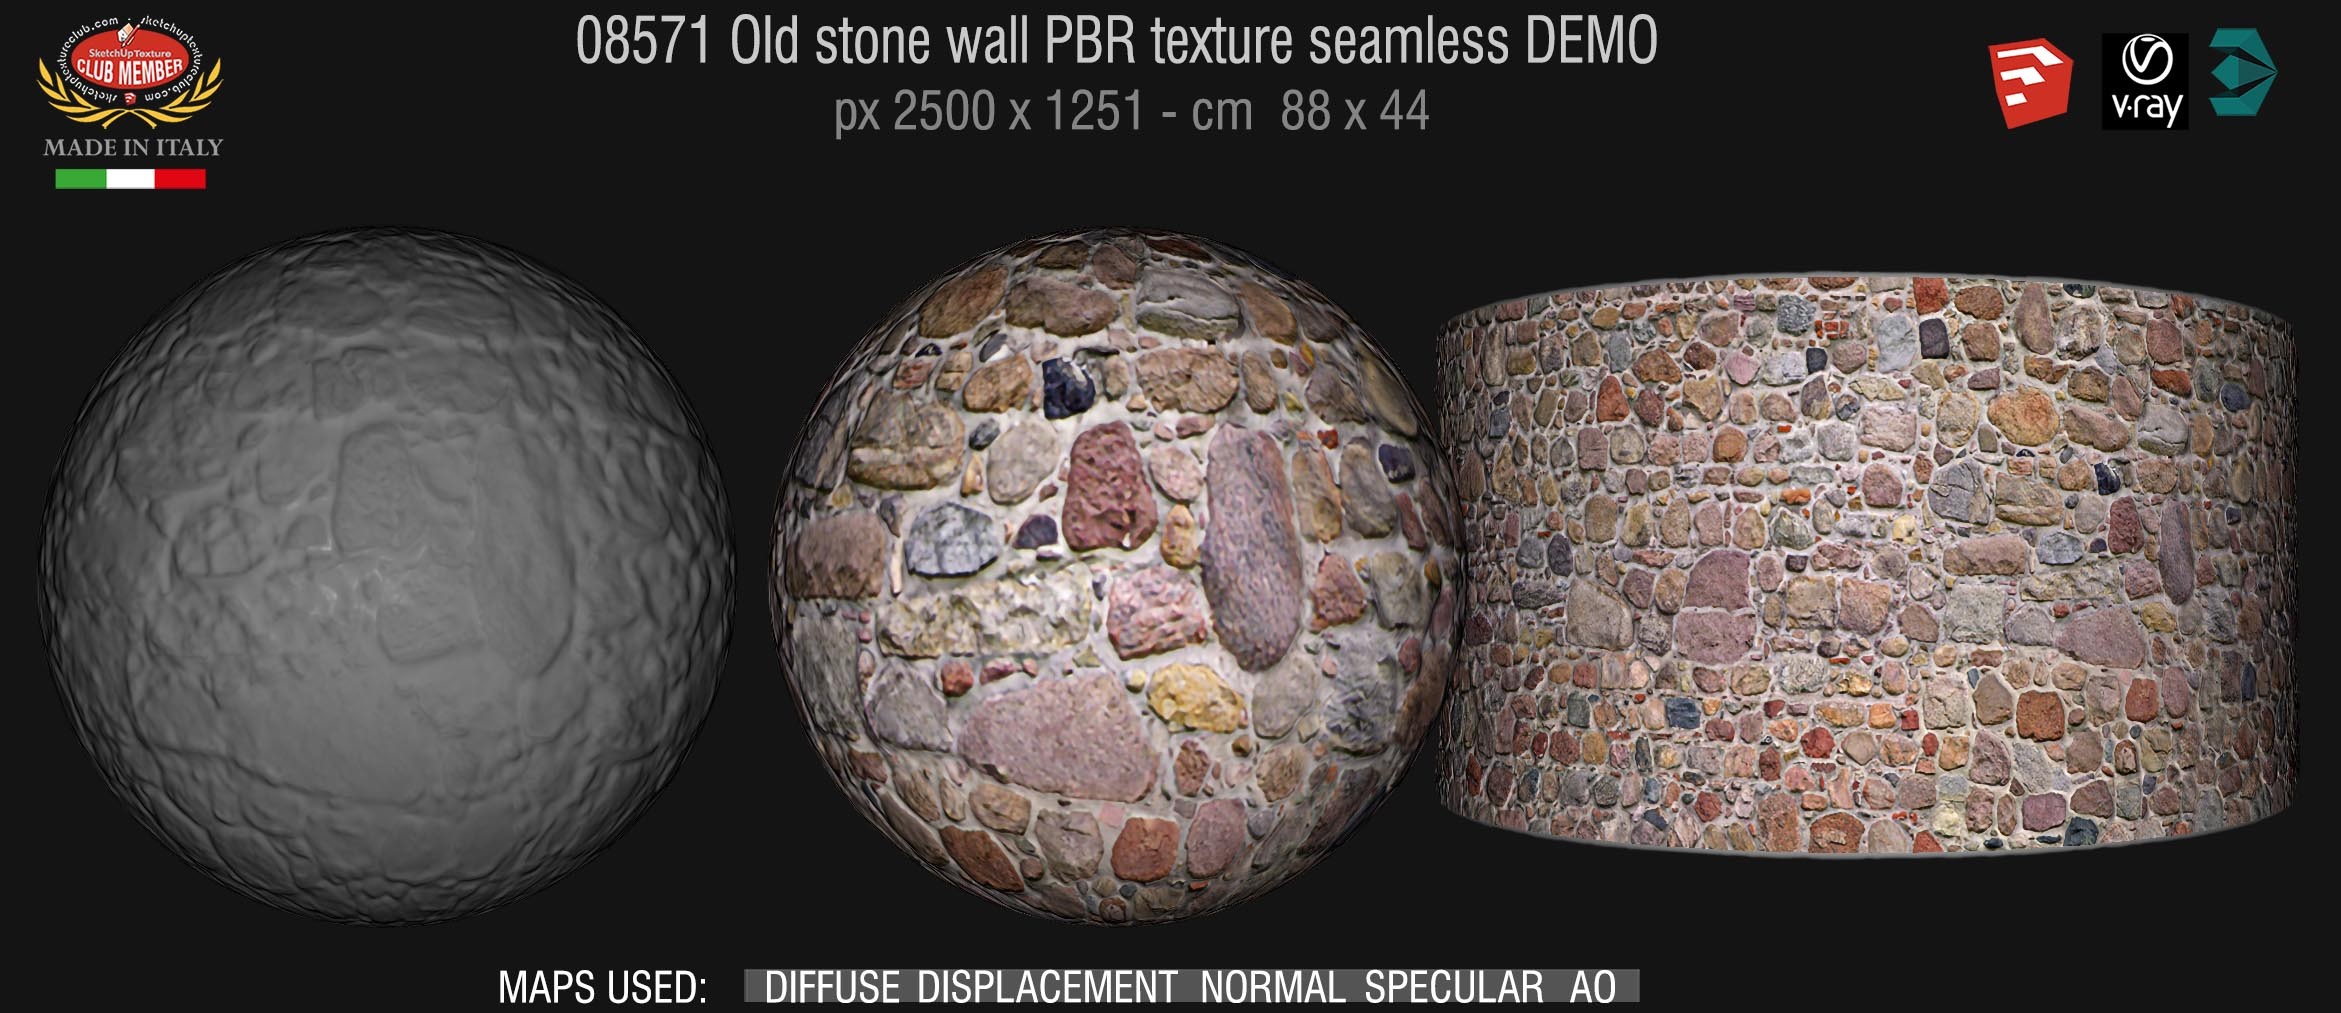 08571 Old stone wall PBR texture seamless DEMO